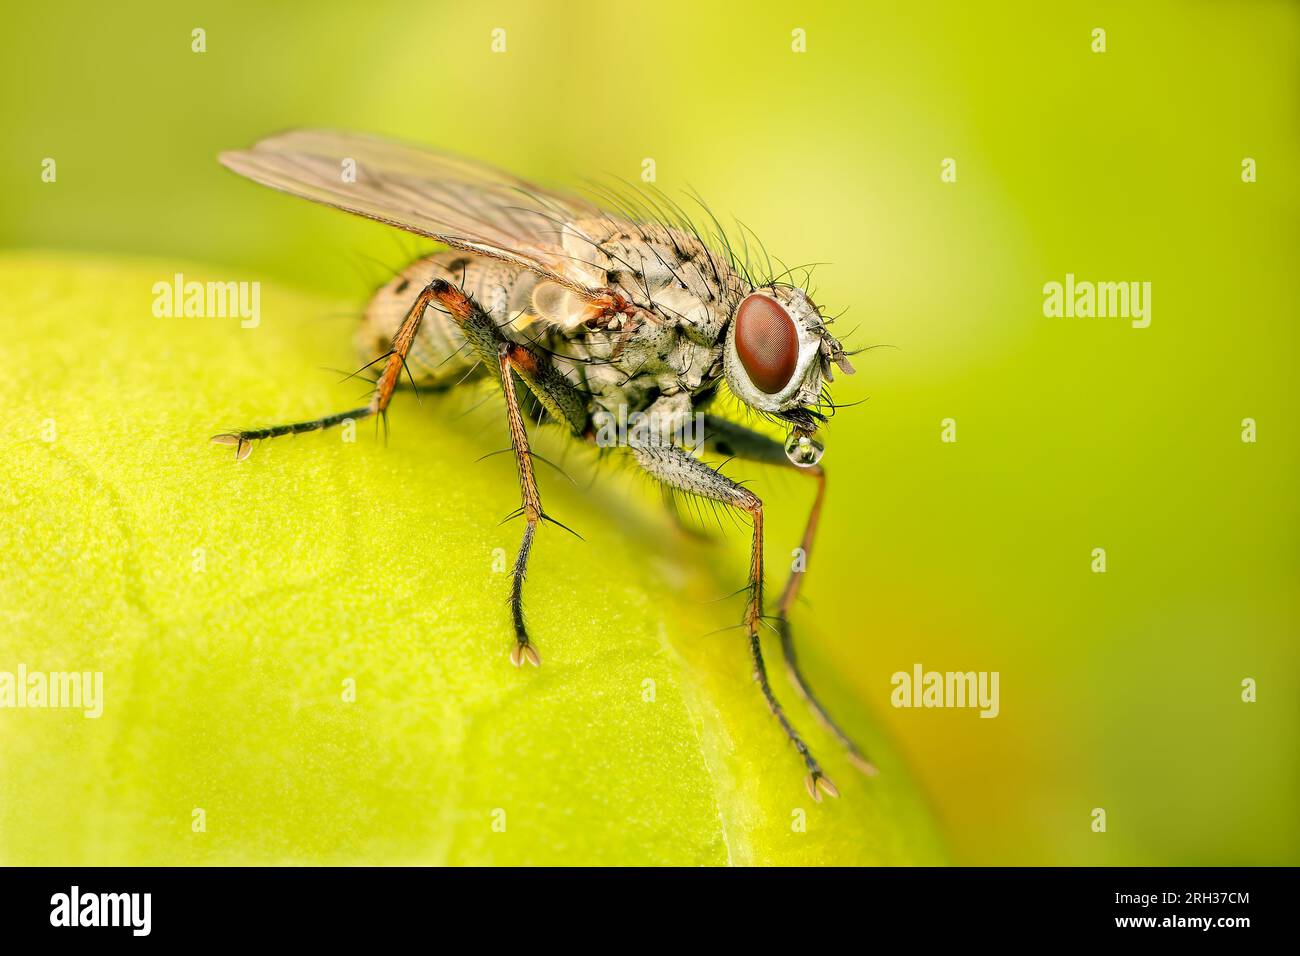 Small Coenosia fly making bubbles to cool down with blurred background and copy space Stock Photo